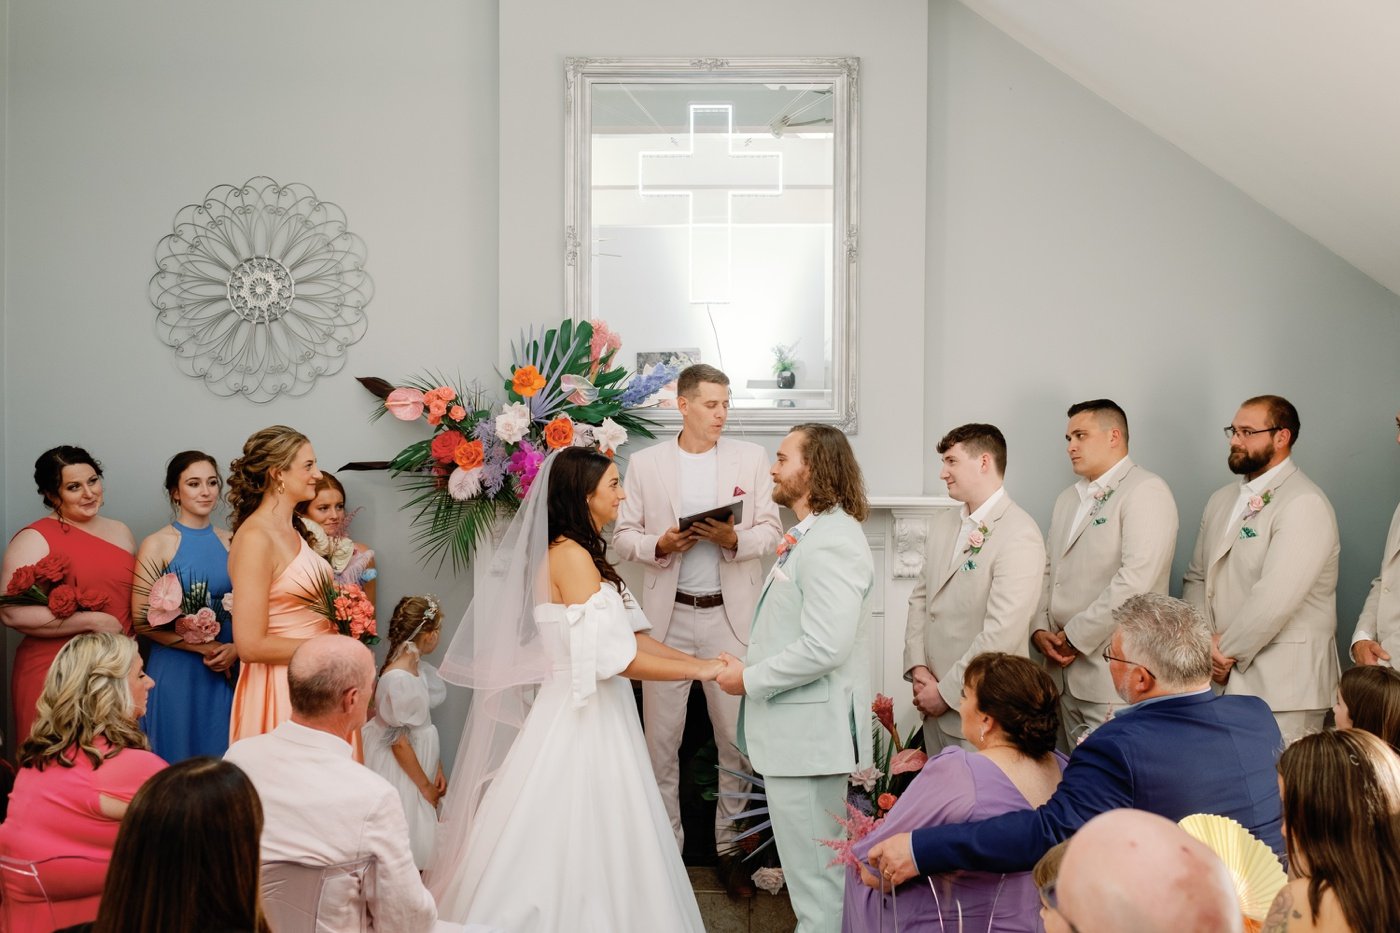 Intimate wedding ceremony in the bride's parent's living room